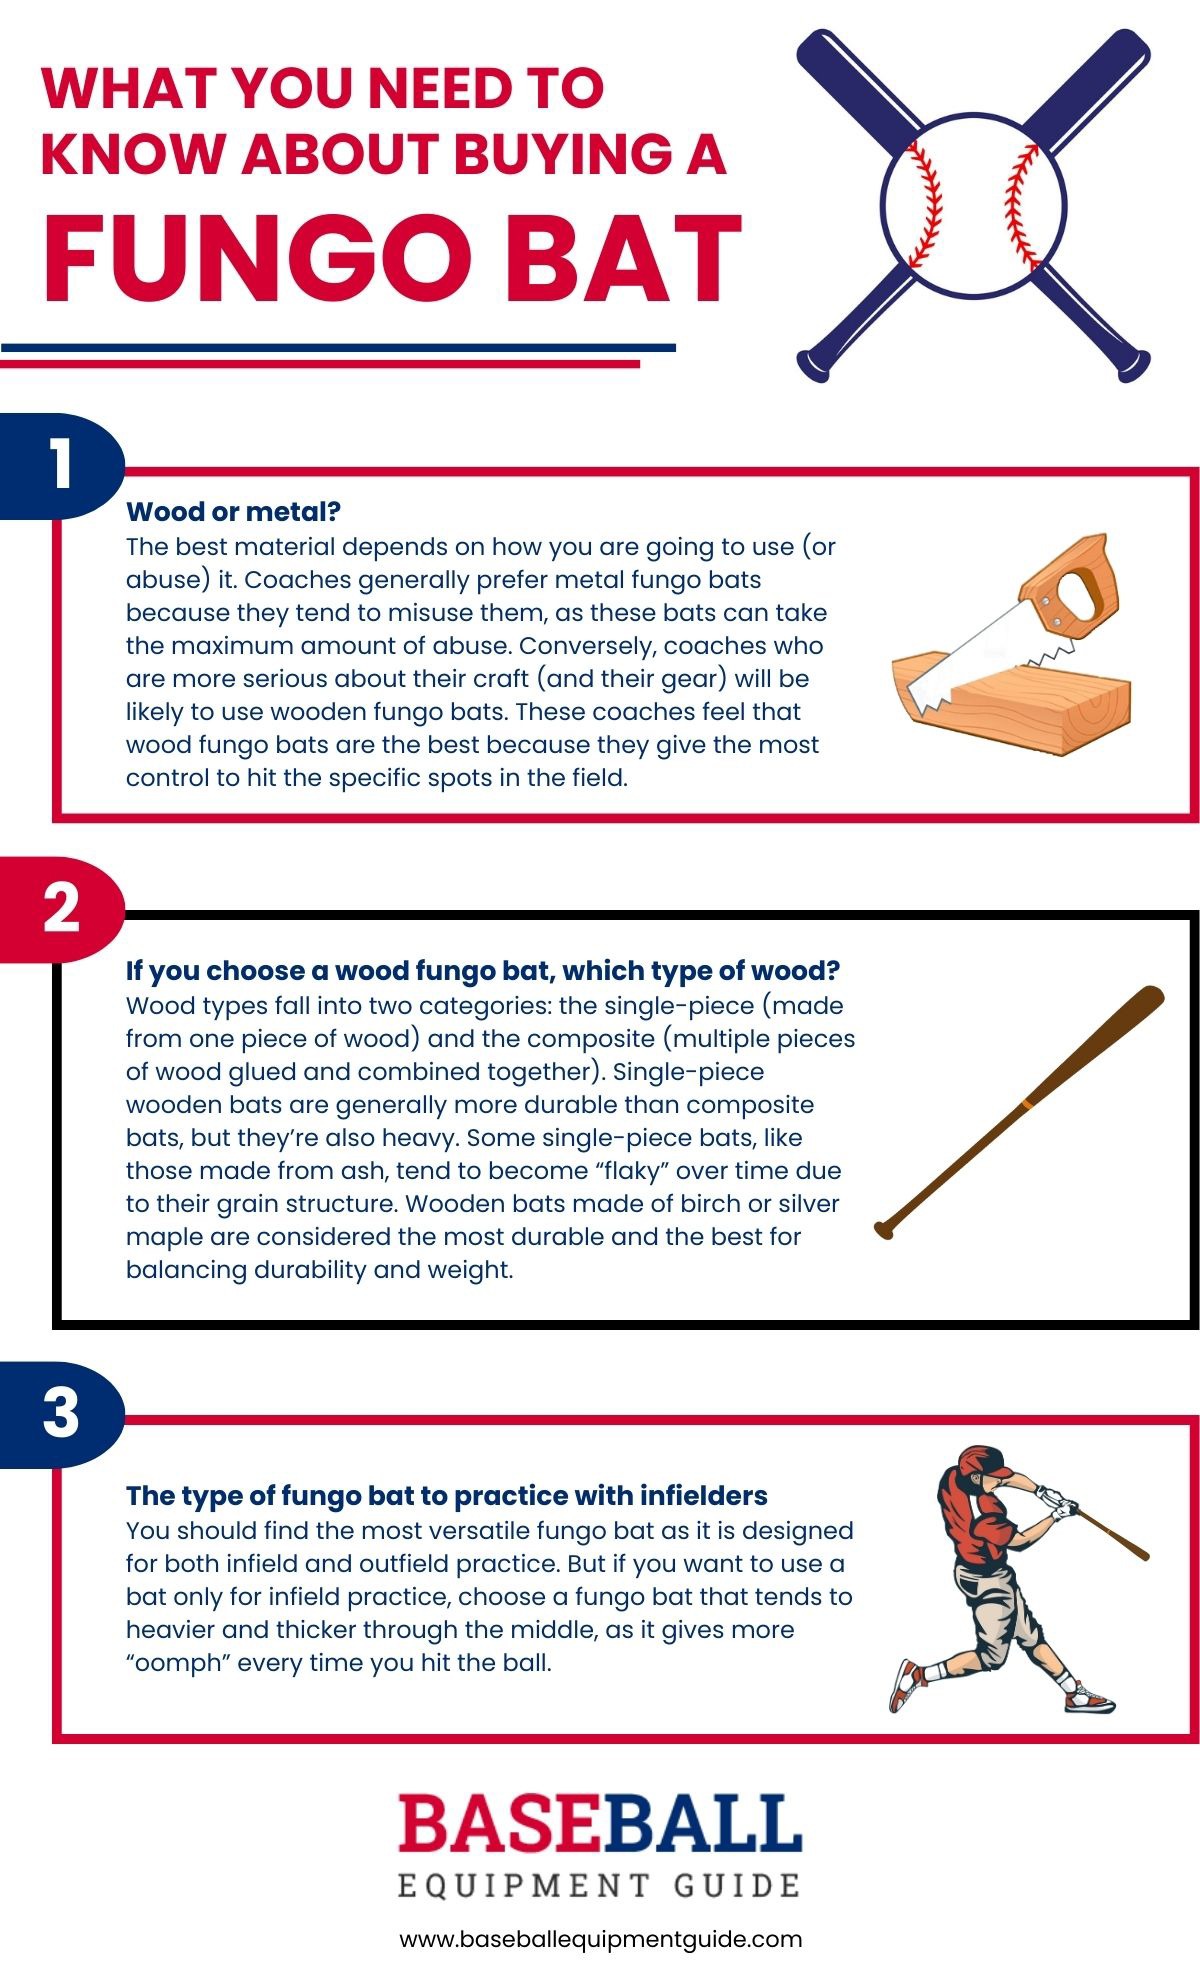 What you need to know about buying a fungo bat